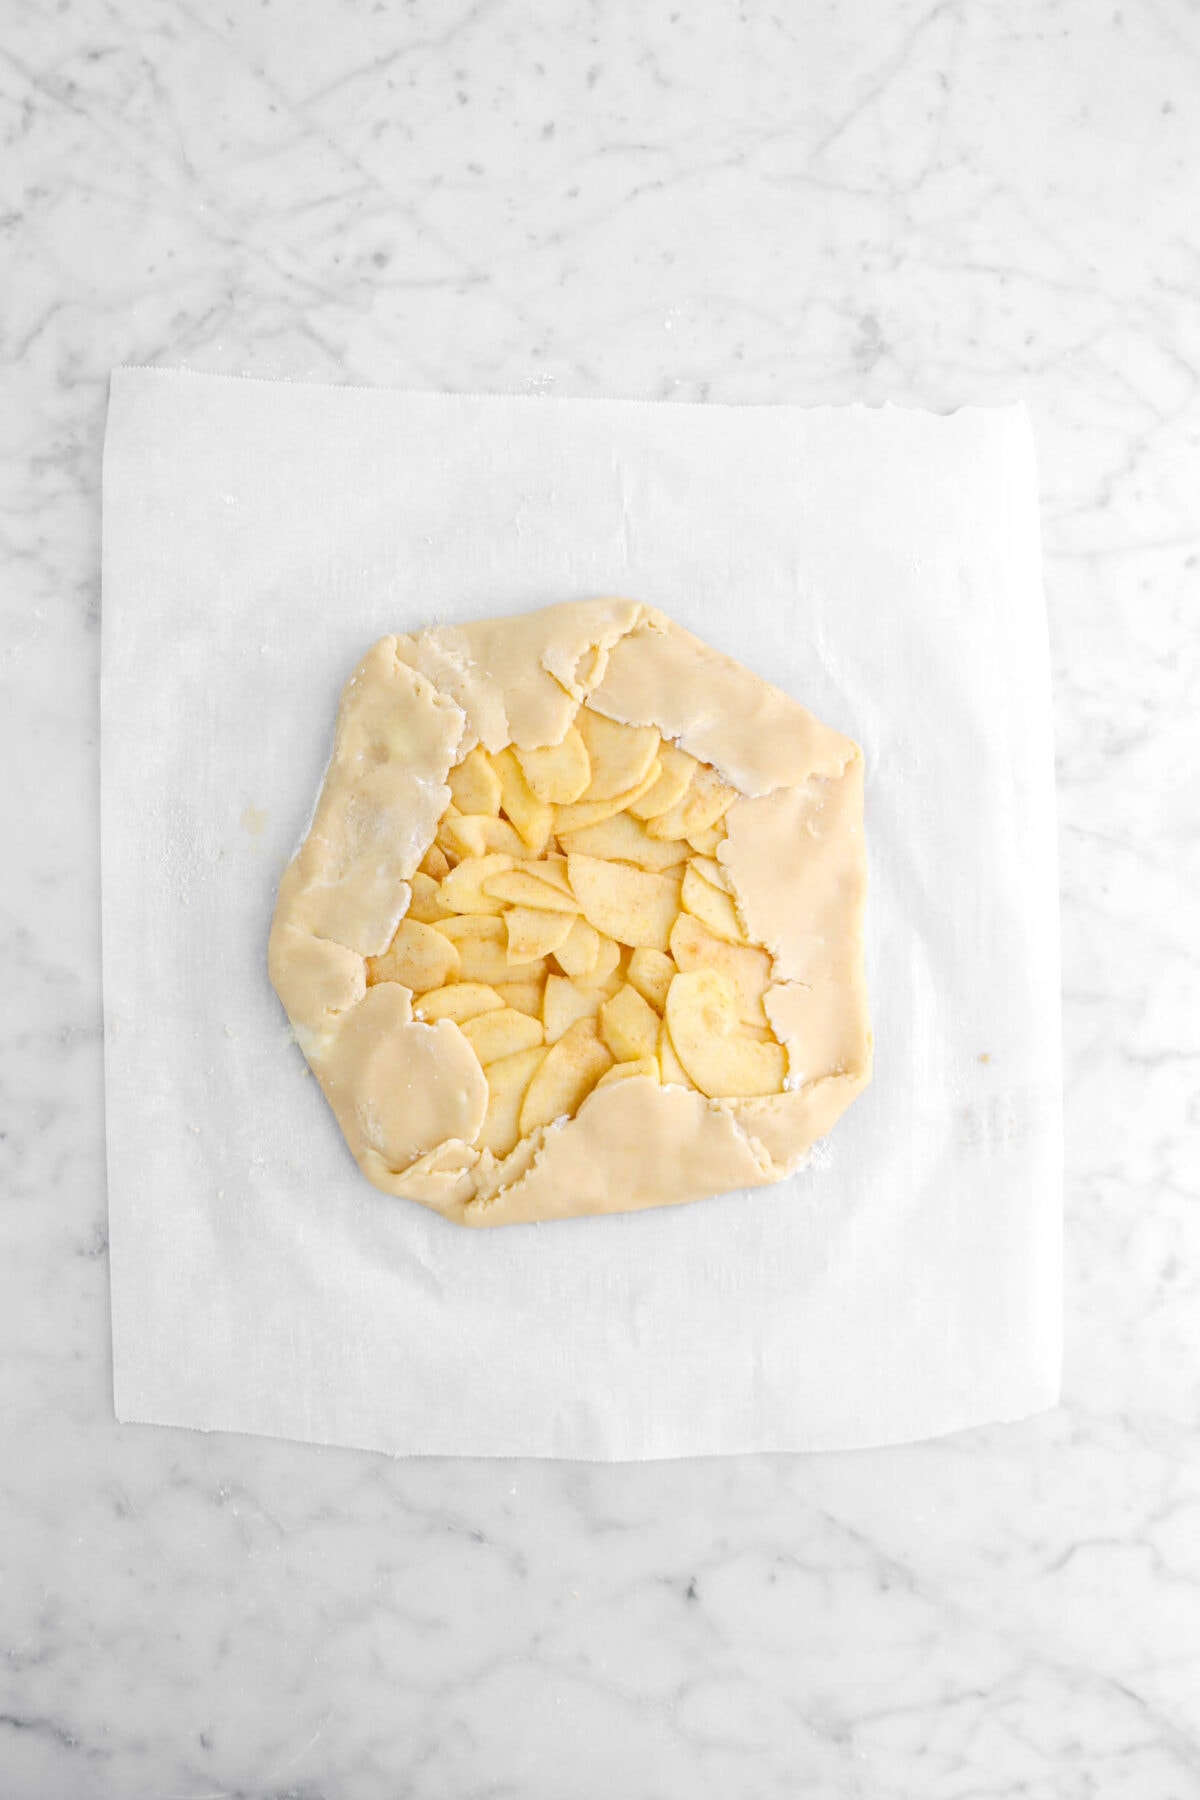 unbaked apple galette on parchment paper